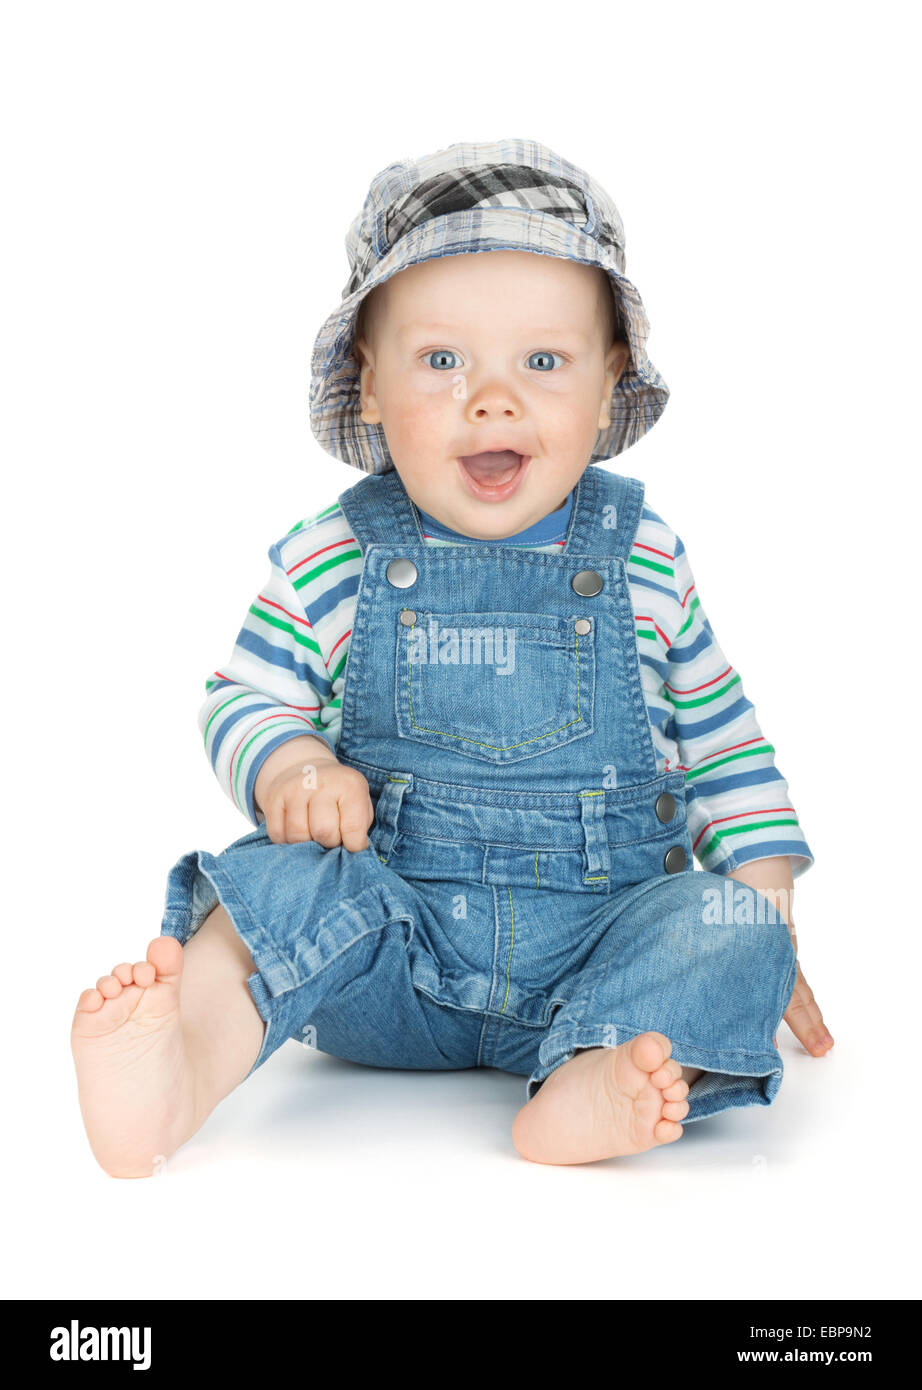 Small cute baby boy in jeans. Isolated on white background Stock Photo